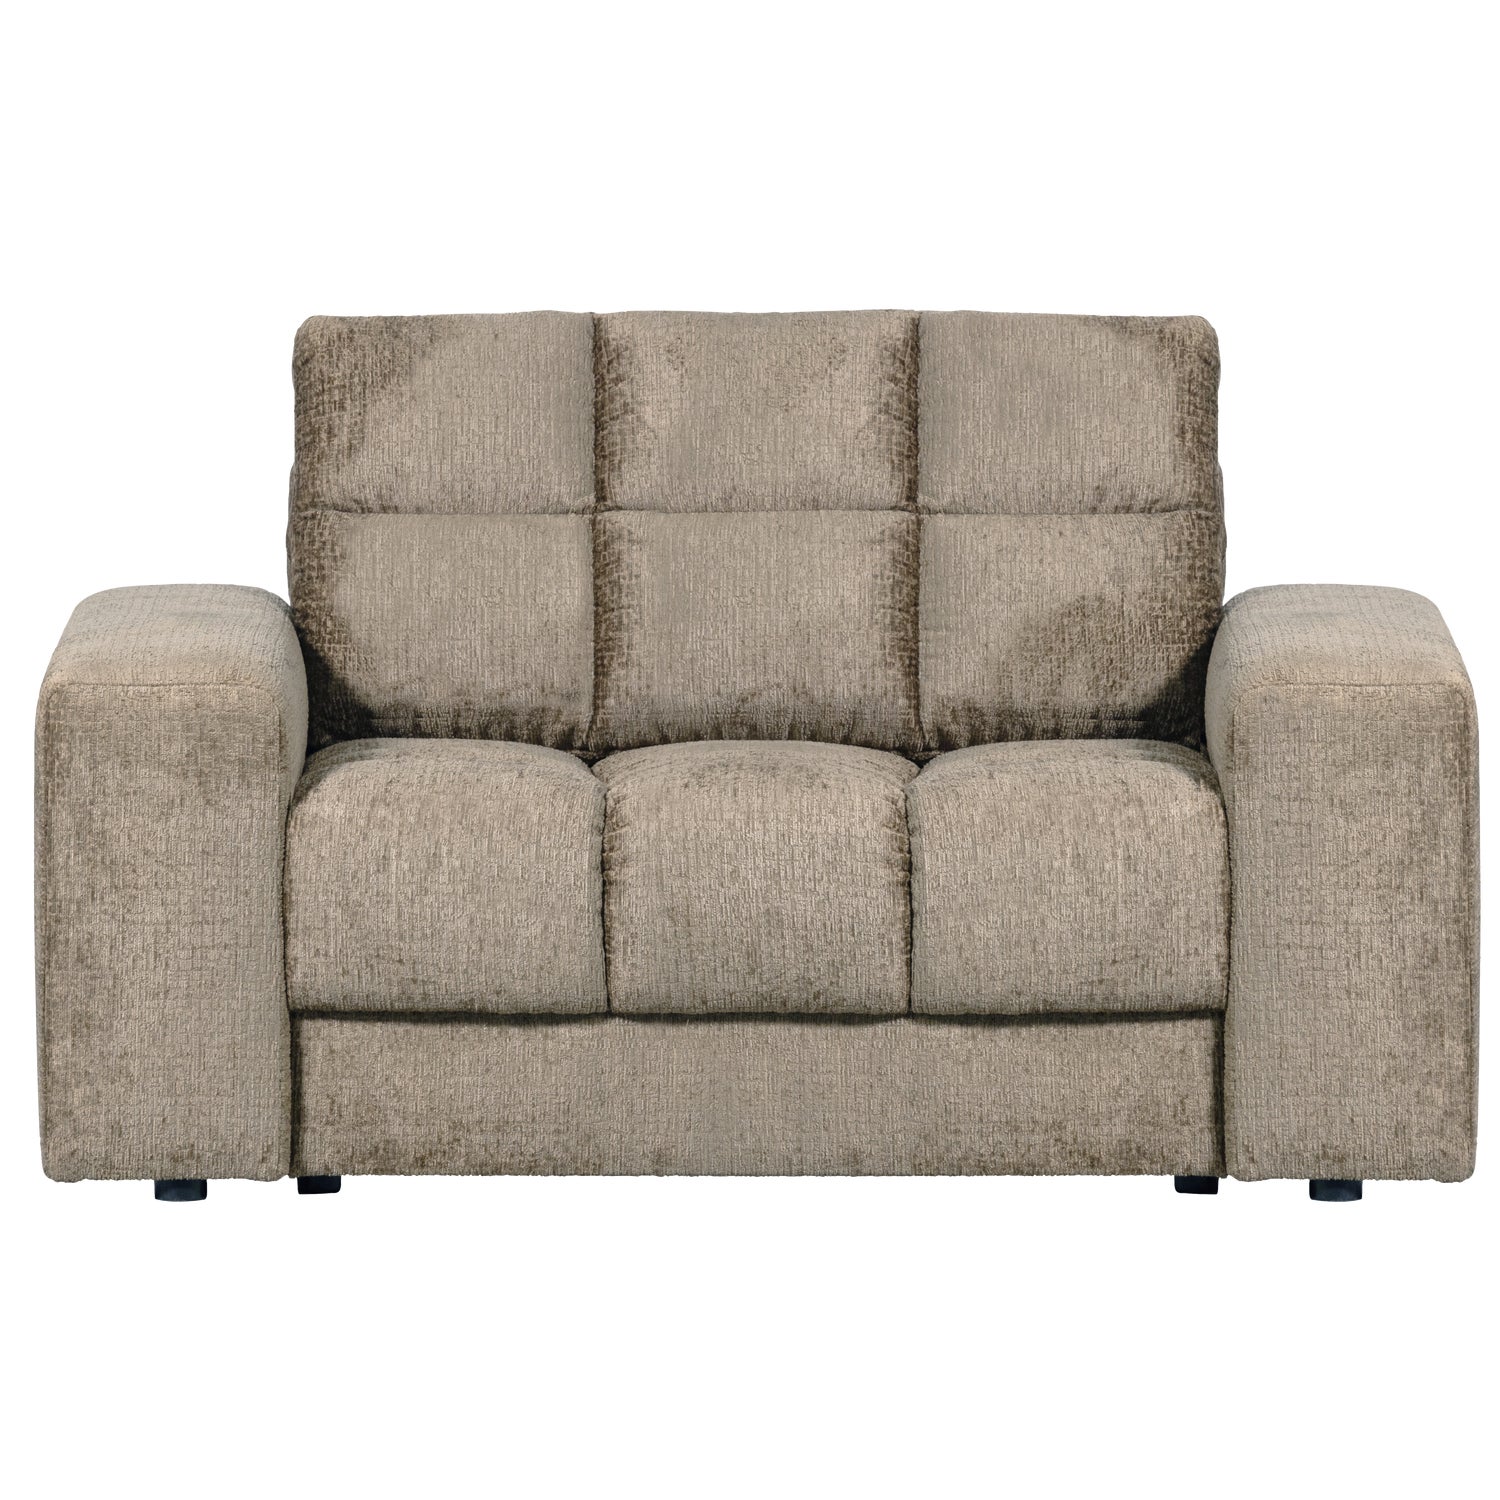 379006-WH-01_VS_WE_second_date_loveseat_structure_velvet_wheatfield.png?auto=webp&format=png&width=1500&height=1500